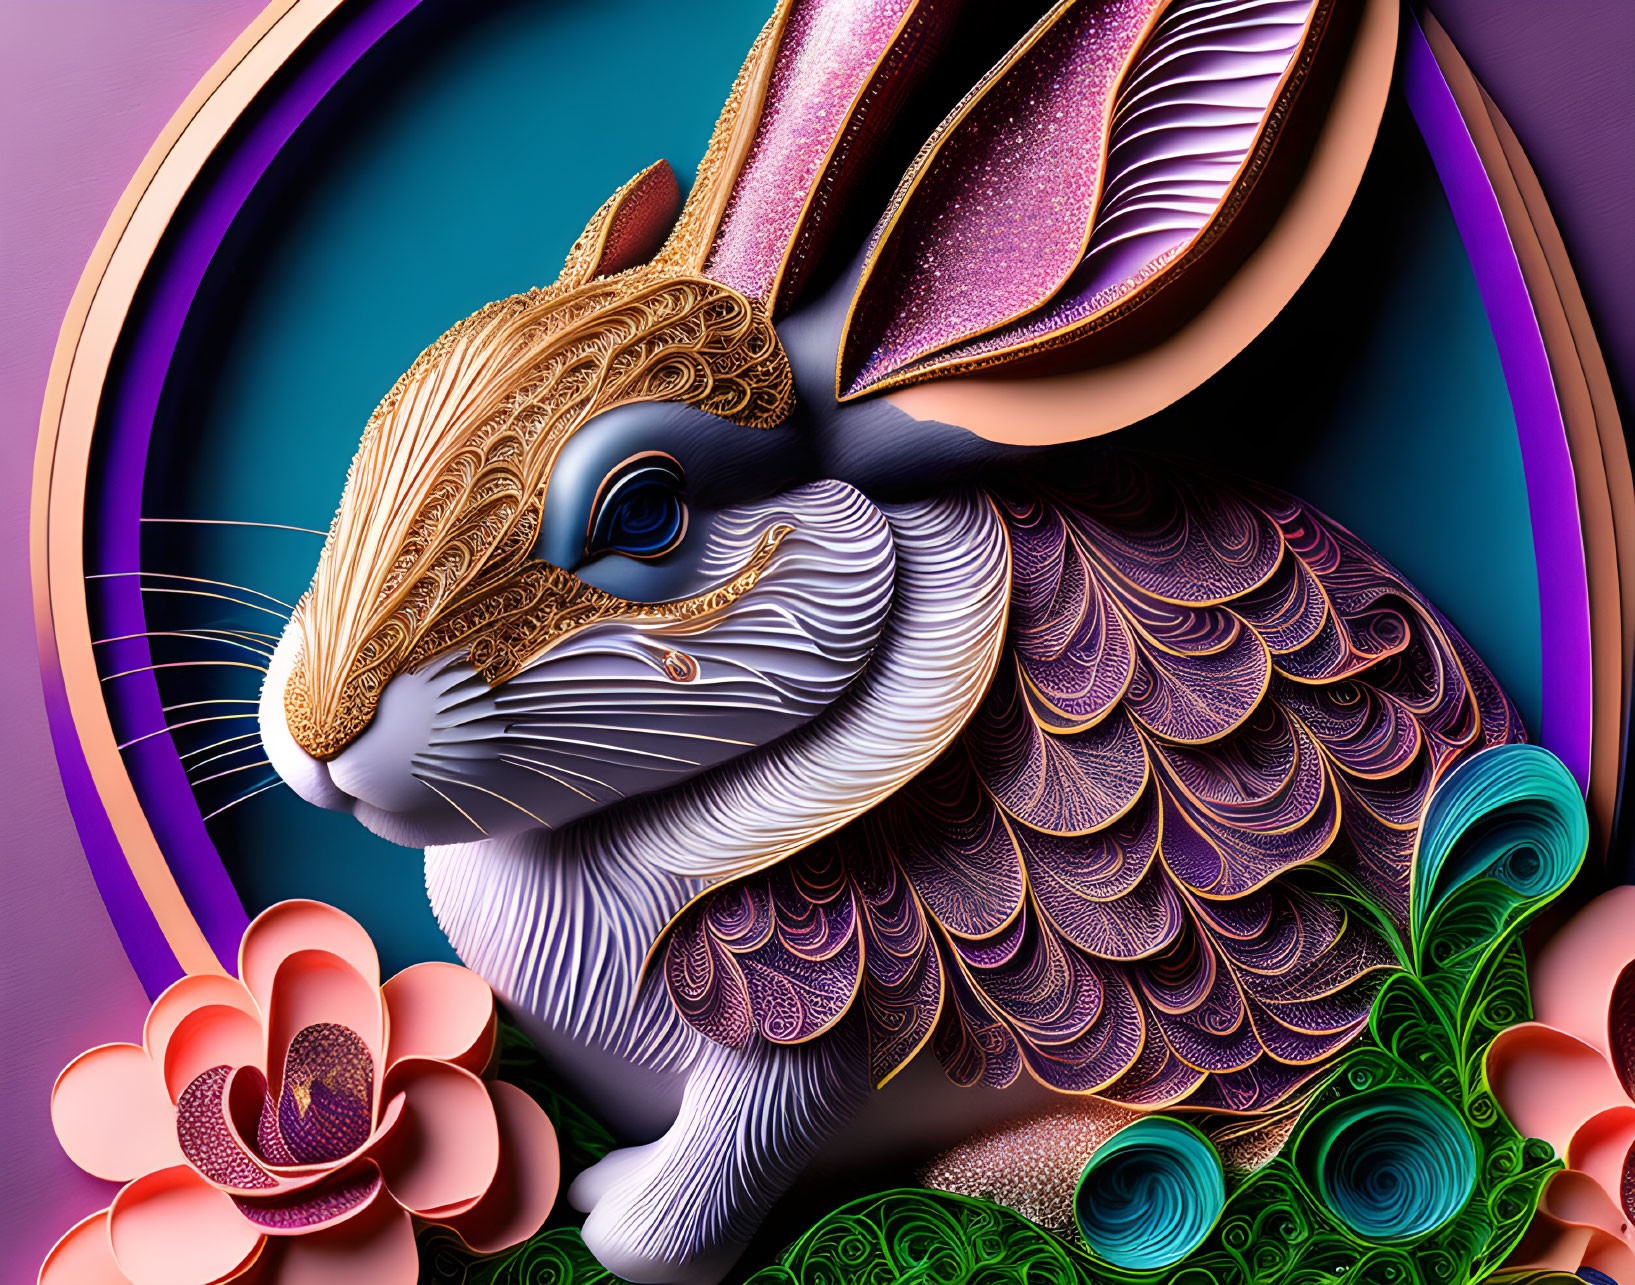 Detailed digital artwork: Textured rabbit with paisley patterns, circular layers, and flowers on purple background